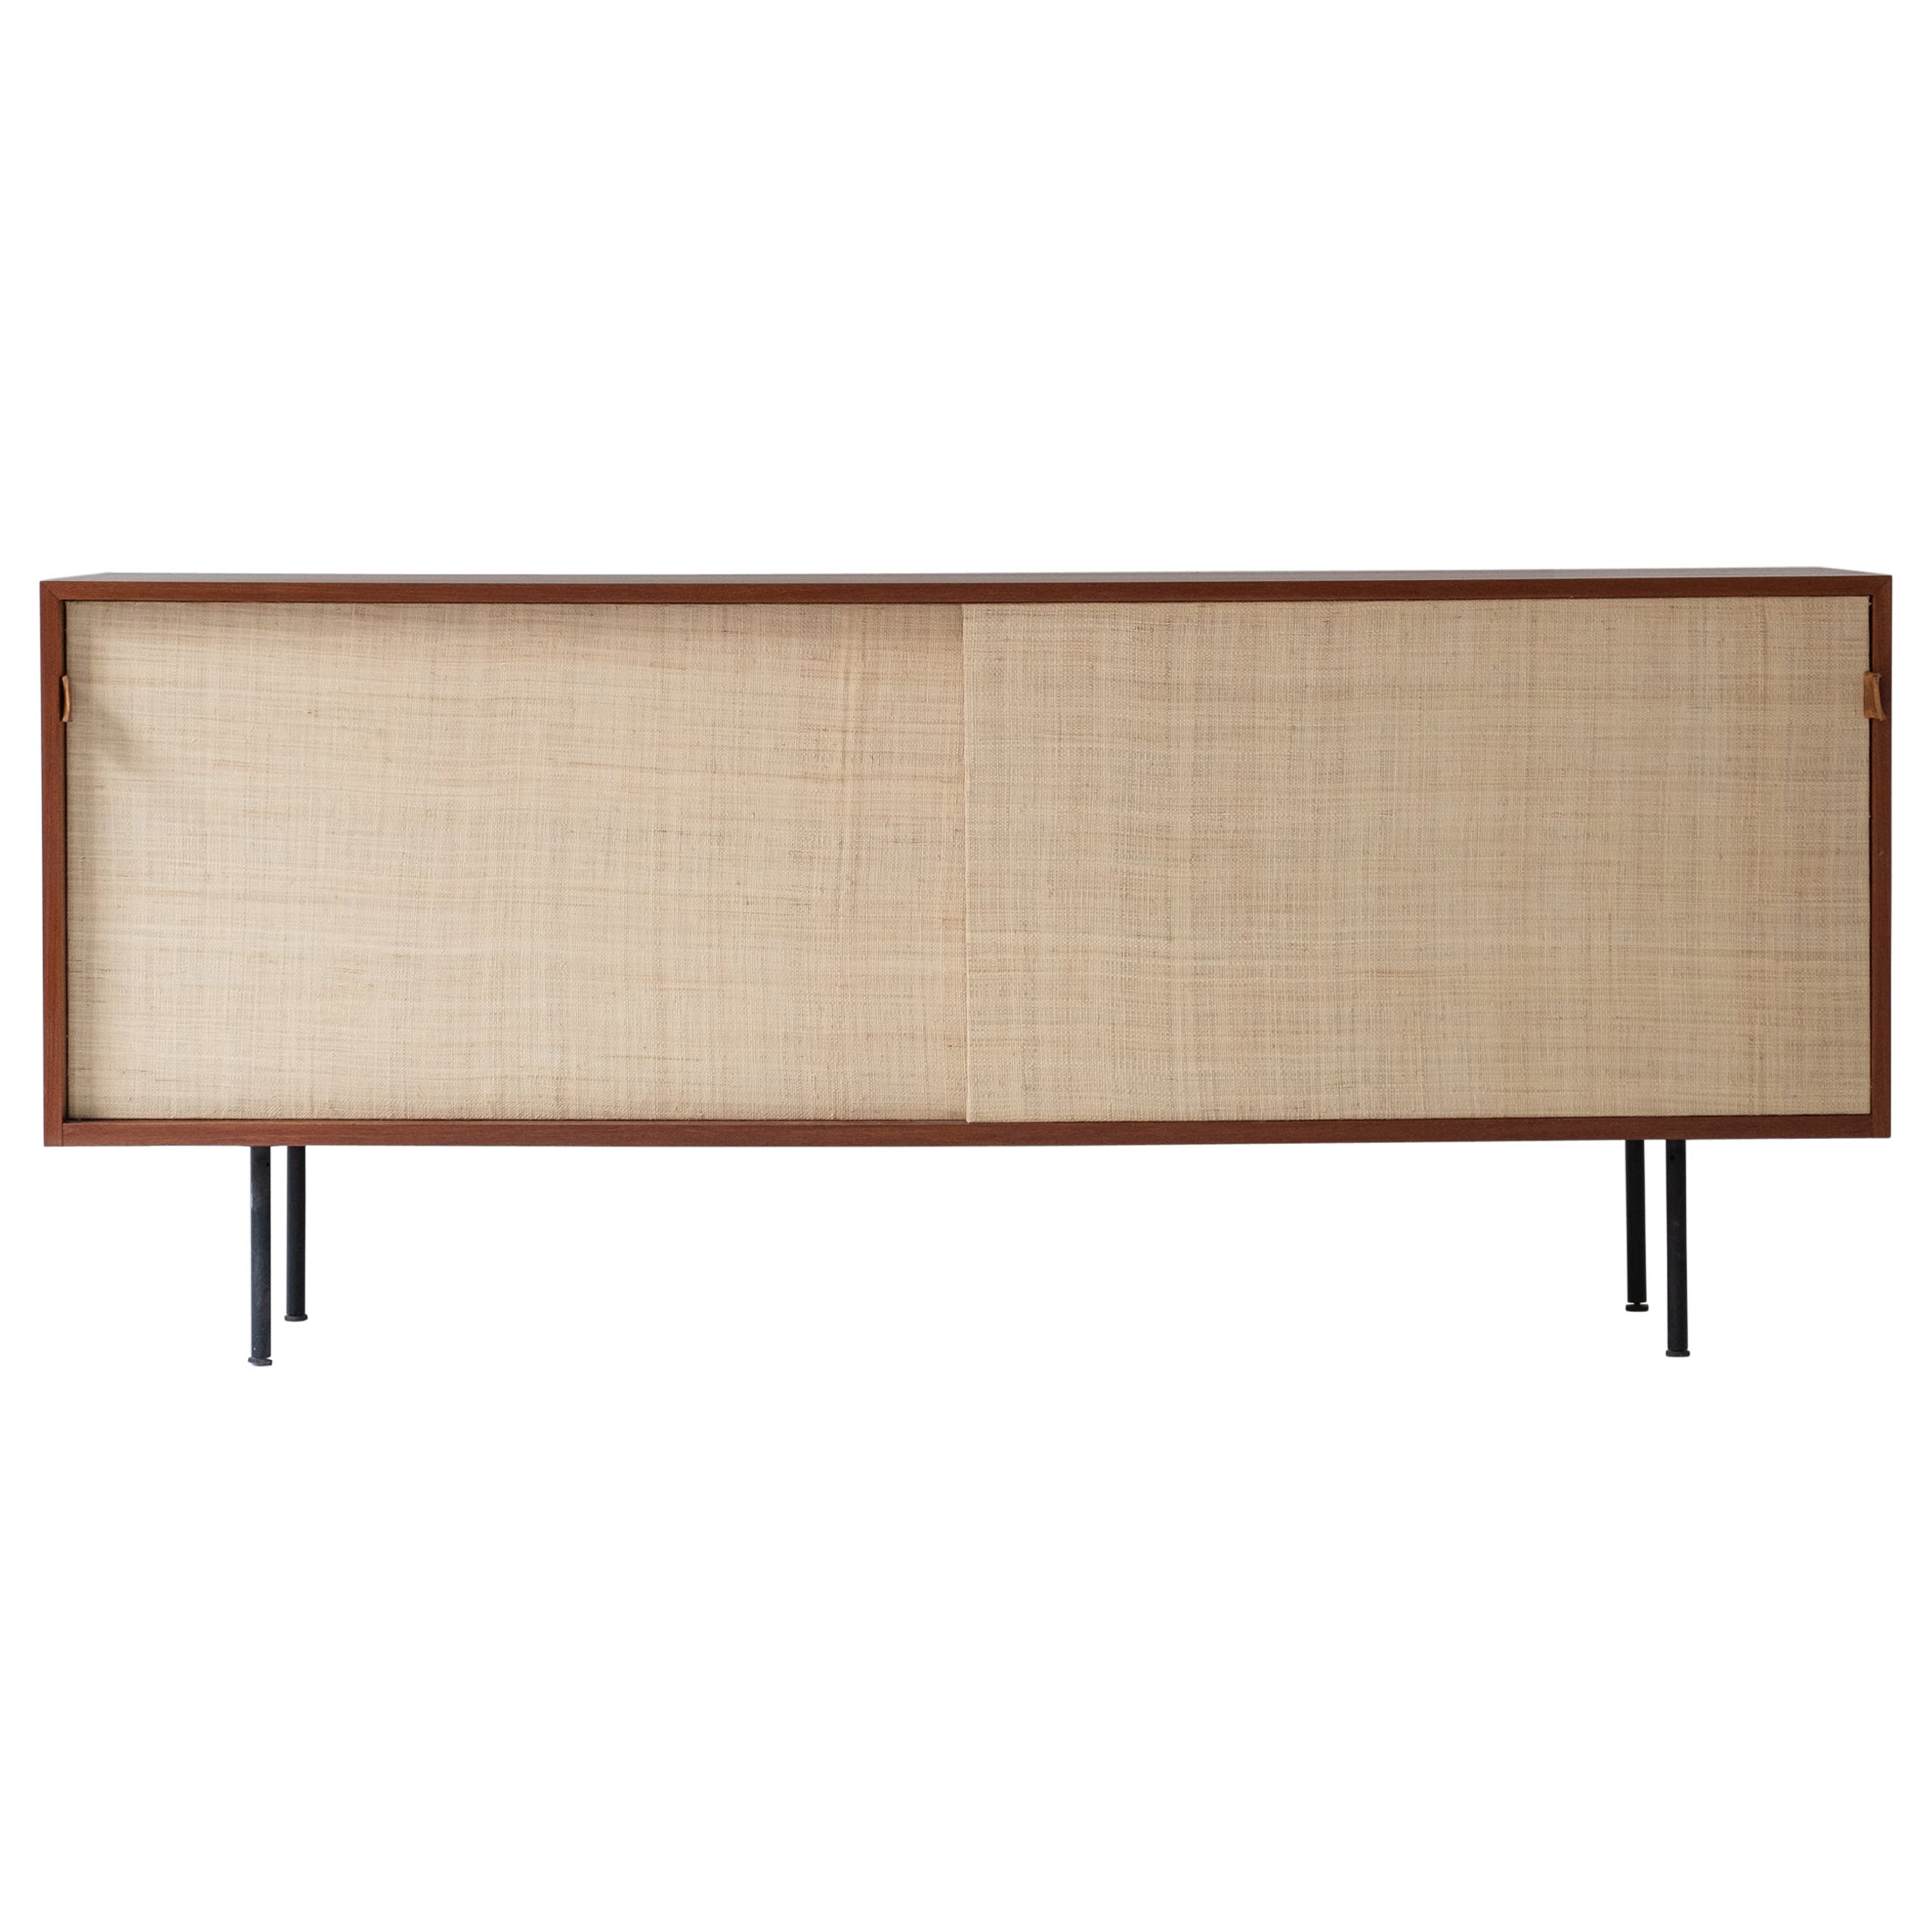 Sideboard Model 116 by Florence Knoll for Knoll International, USA, 1950s